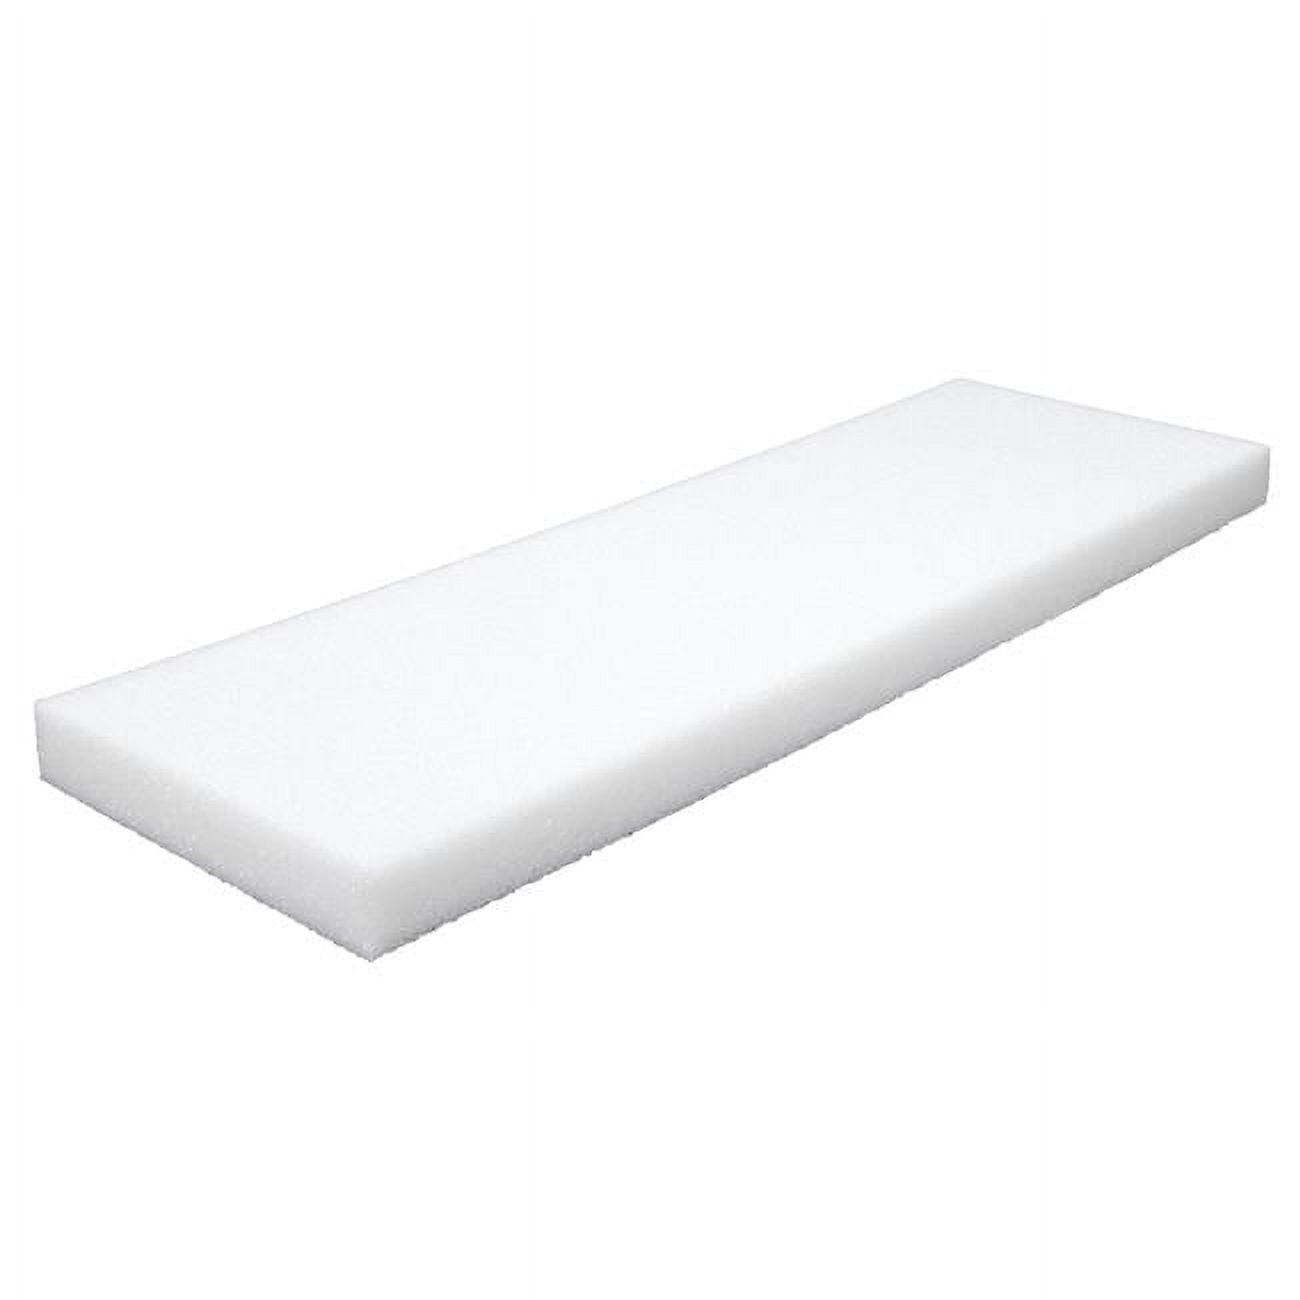 White EVA Foam Sheet, 9 inch x 12 inch, 6 mm- Extra Thick! Great